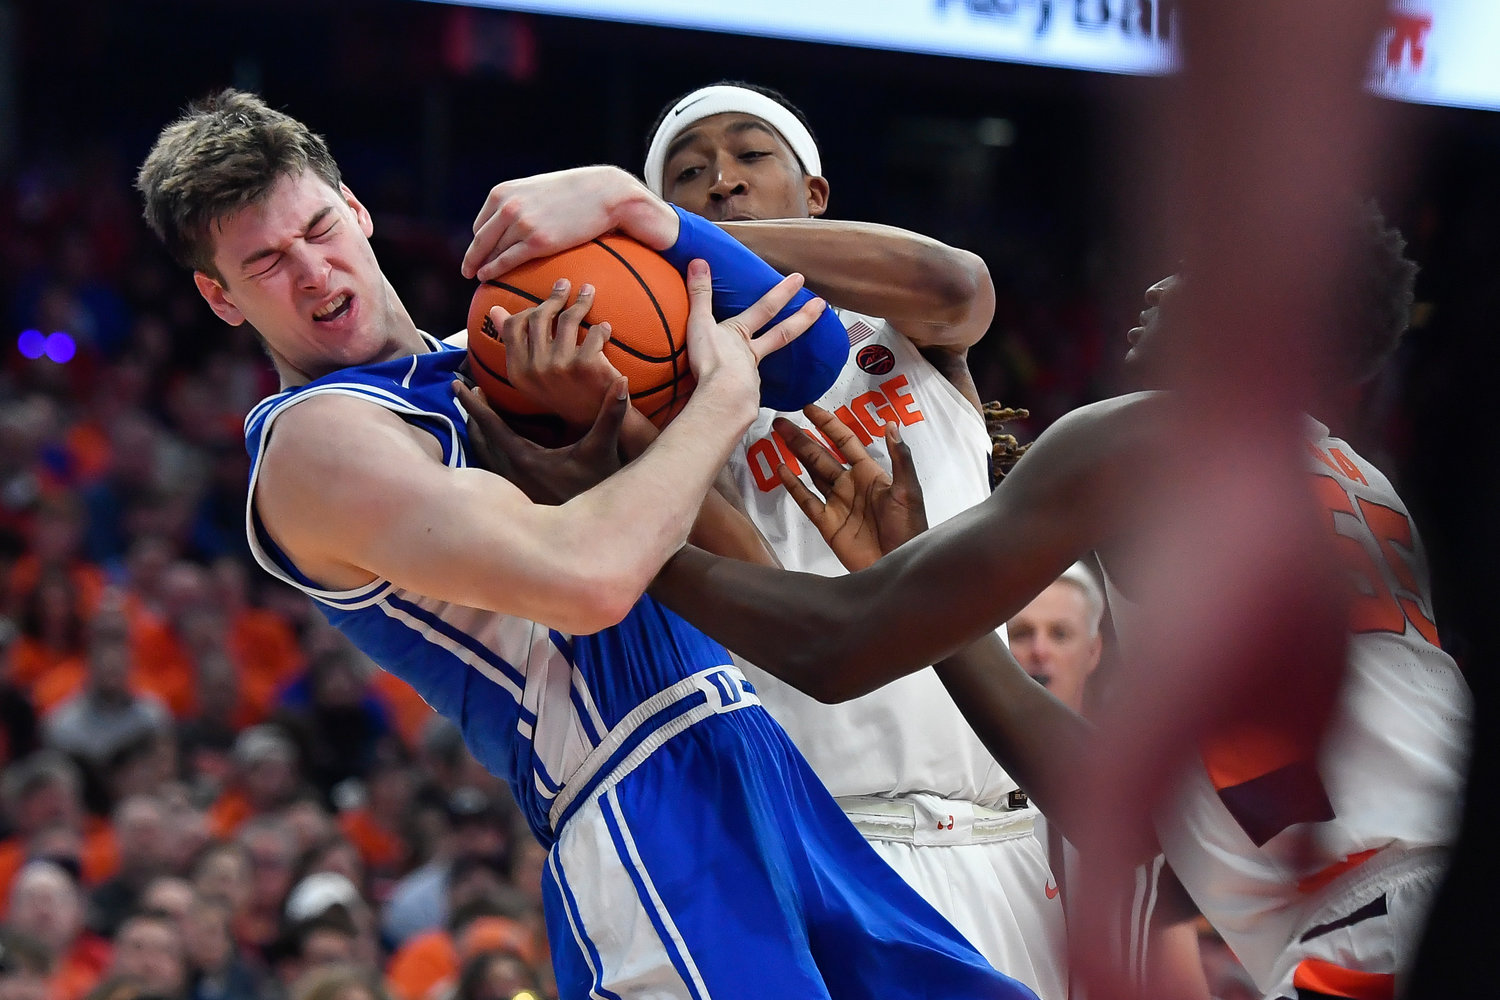 Duke center Kyle Filipowski, left, fights for possession of the ball against Syracuse forward Maliq Brown during the first half of Saturday night's ACC game in Syracuse. Filipowski had 14 points and 12 rebounds as the Blue Devils won 77-55.